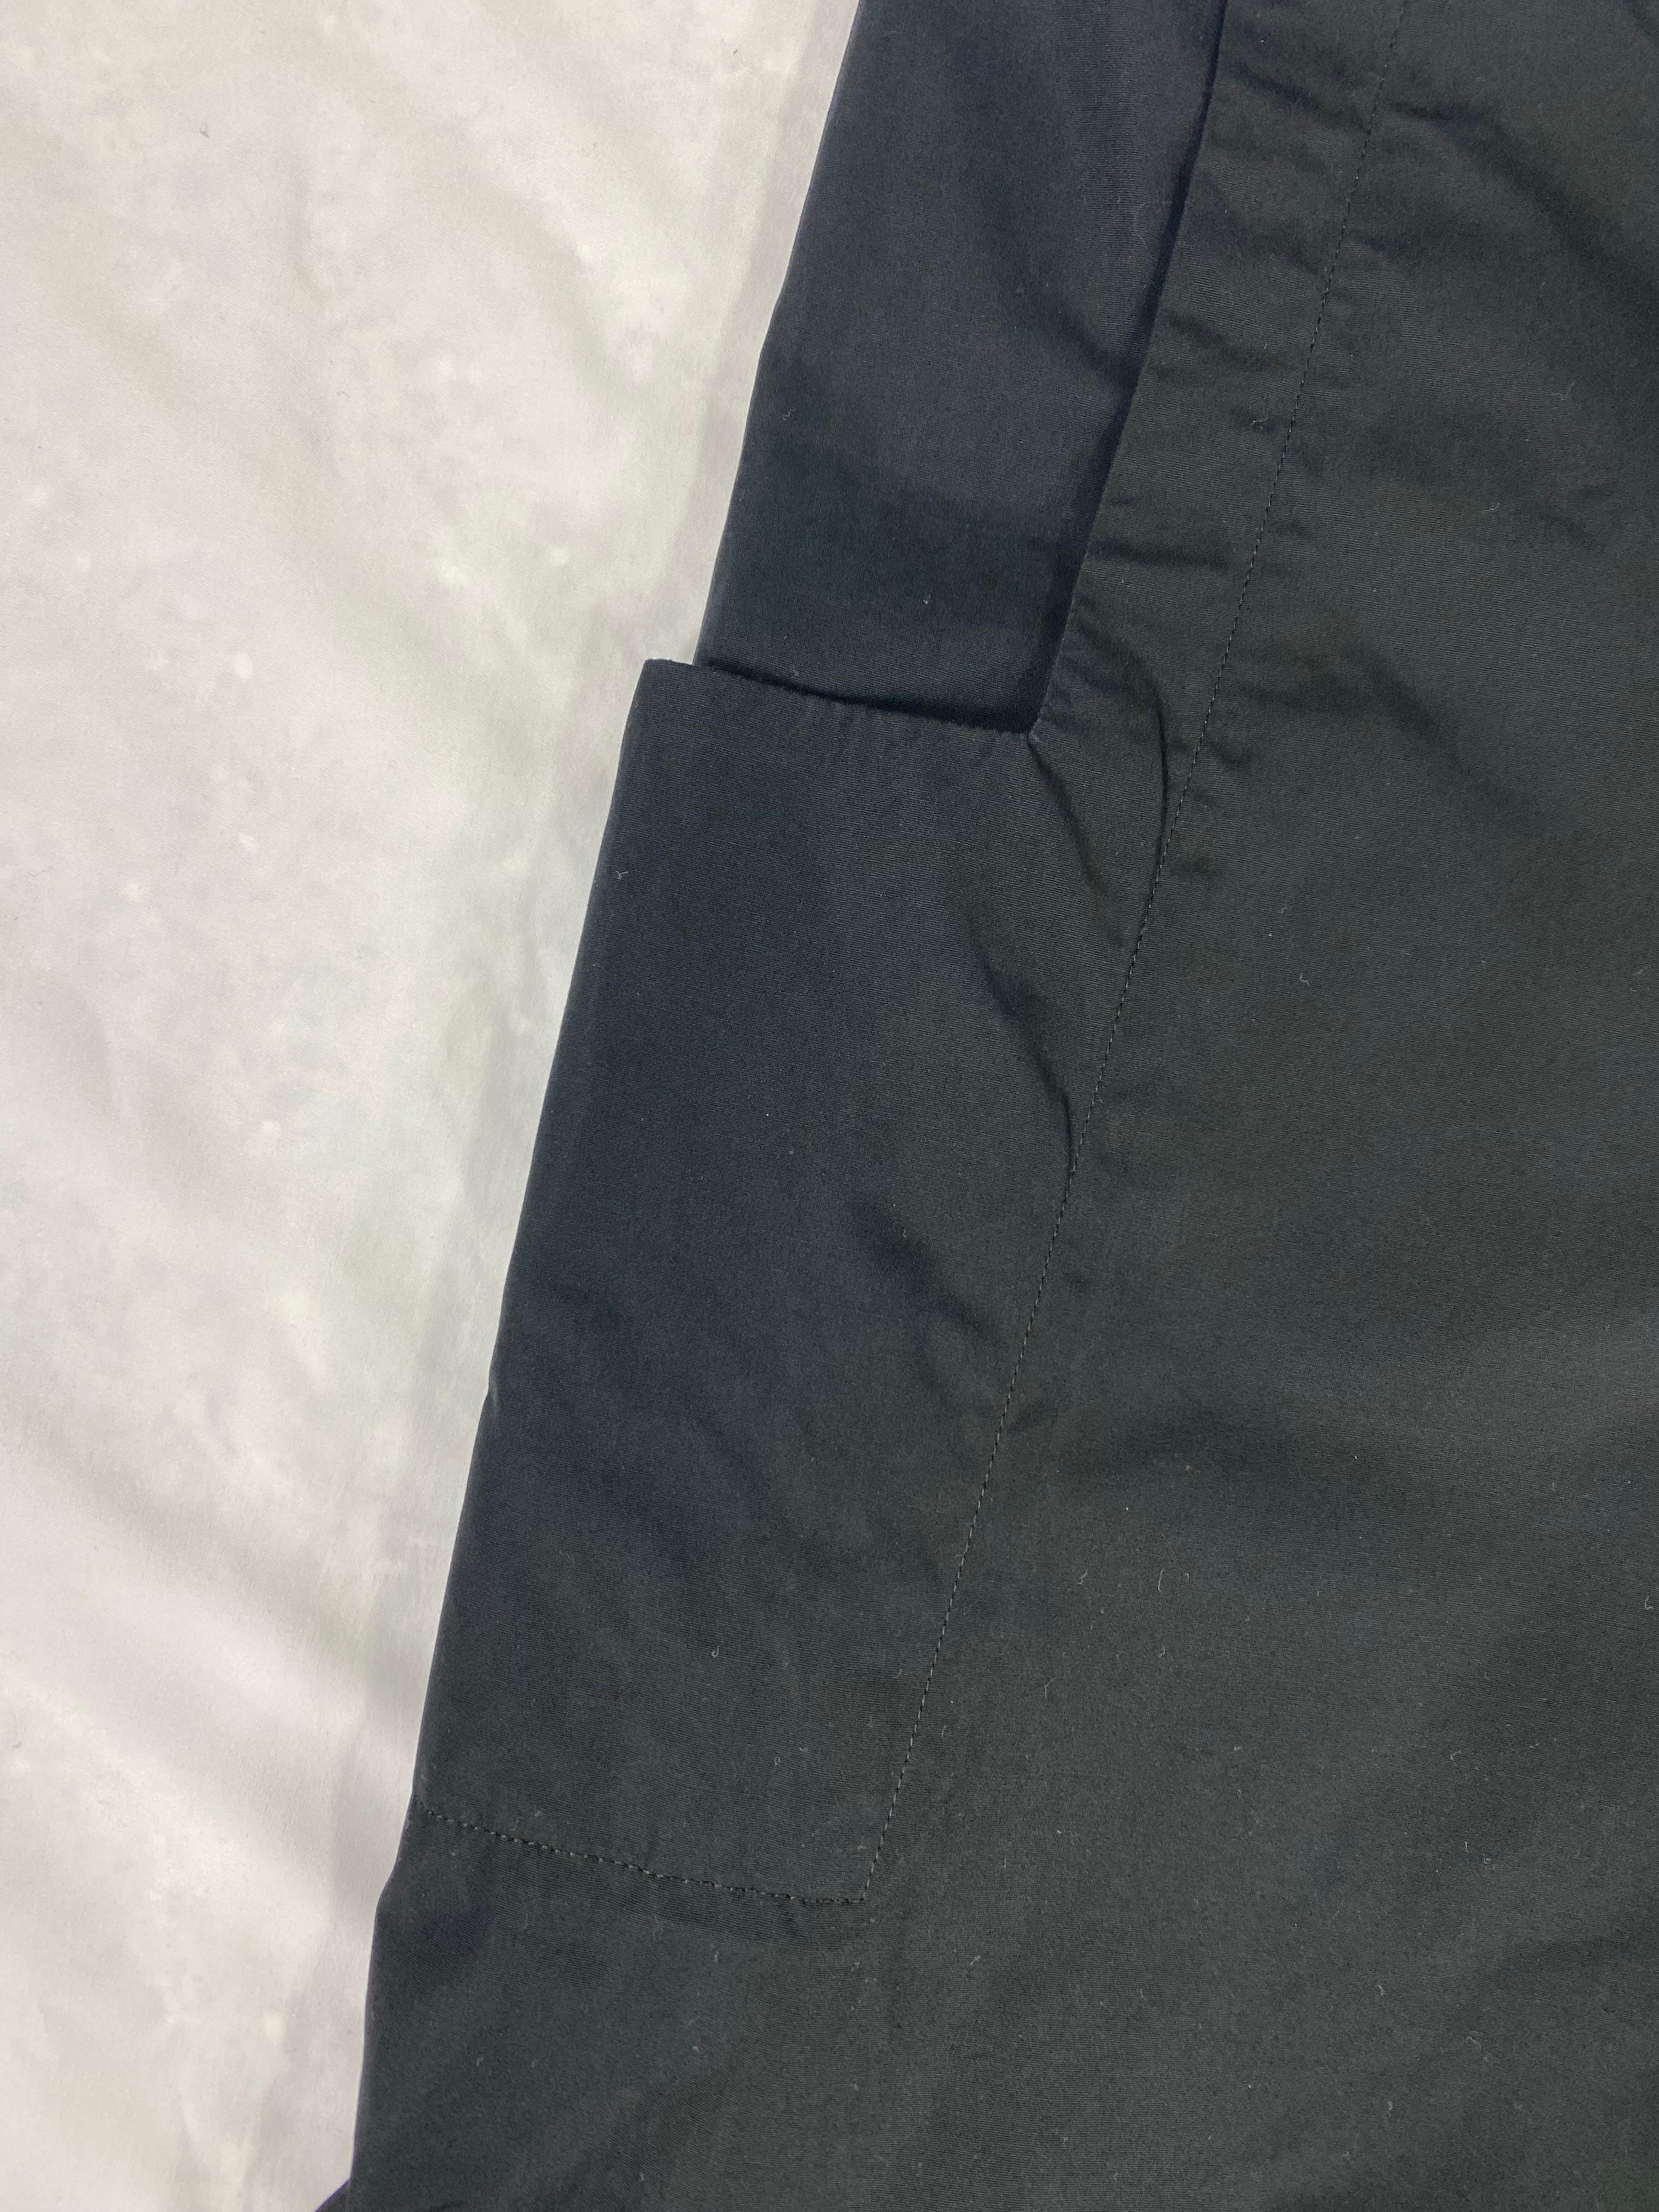 Product details:

The pants are made out of 100% cotton, it features straight leg style, high waist with side pockets and tie closure at the waist.